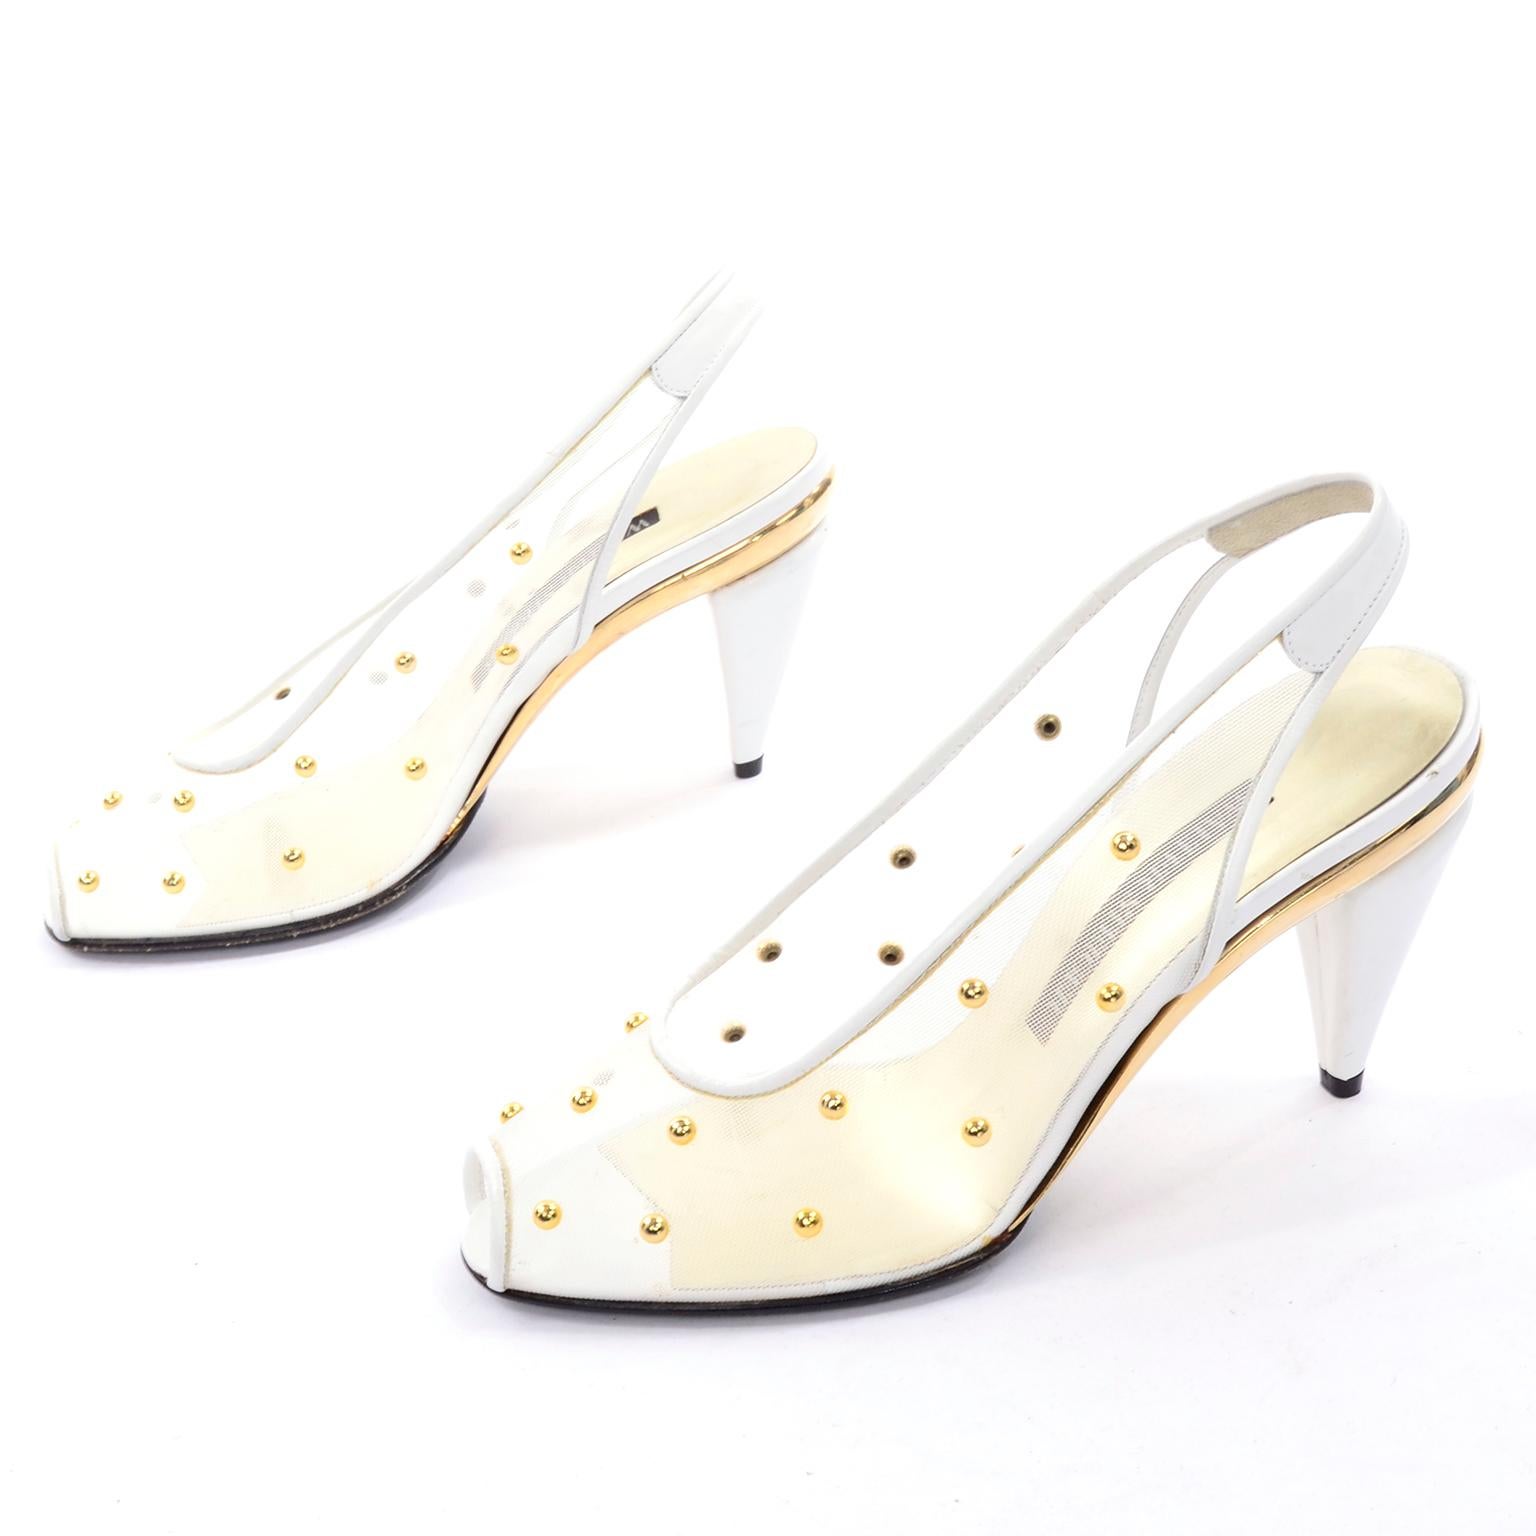 These are stunning vintage Walter Steiger white mesh slingback heels covered in gold tone dome studs. These vintage shoes have a leather sole and peep-toe. We love the gold part of the soles! These would make great wedding shoes! They appear never